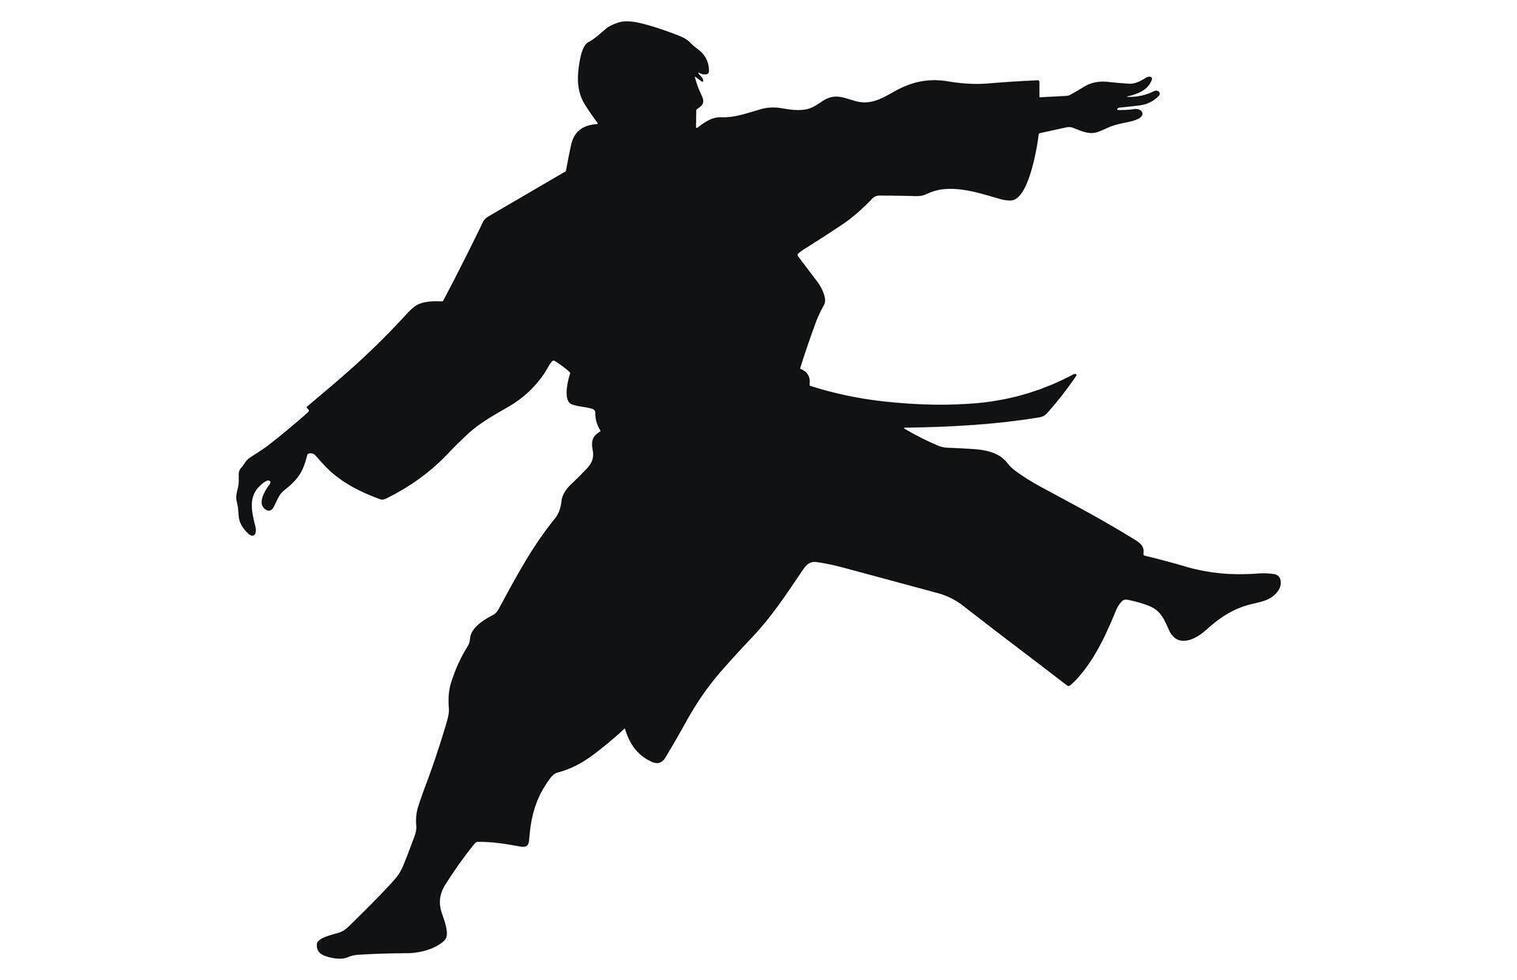 Martial arts,Collection of silhouettes of martial arts. vector